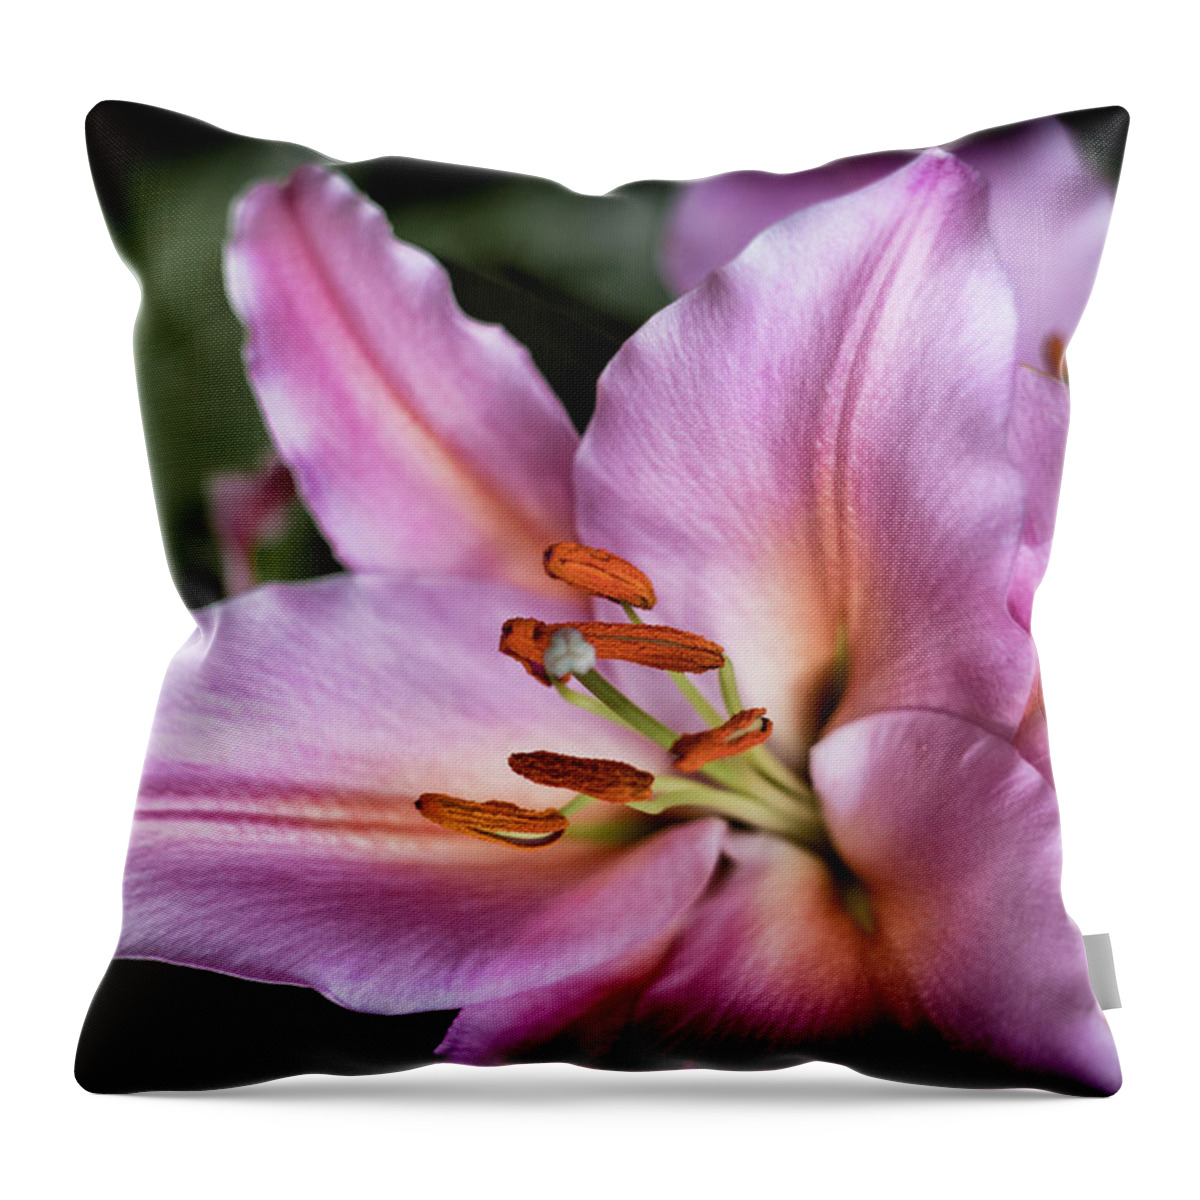 Flower Throw Pillow featuring the photograph Day Lily by Scott Wyatt